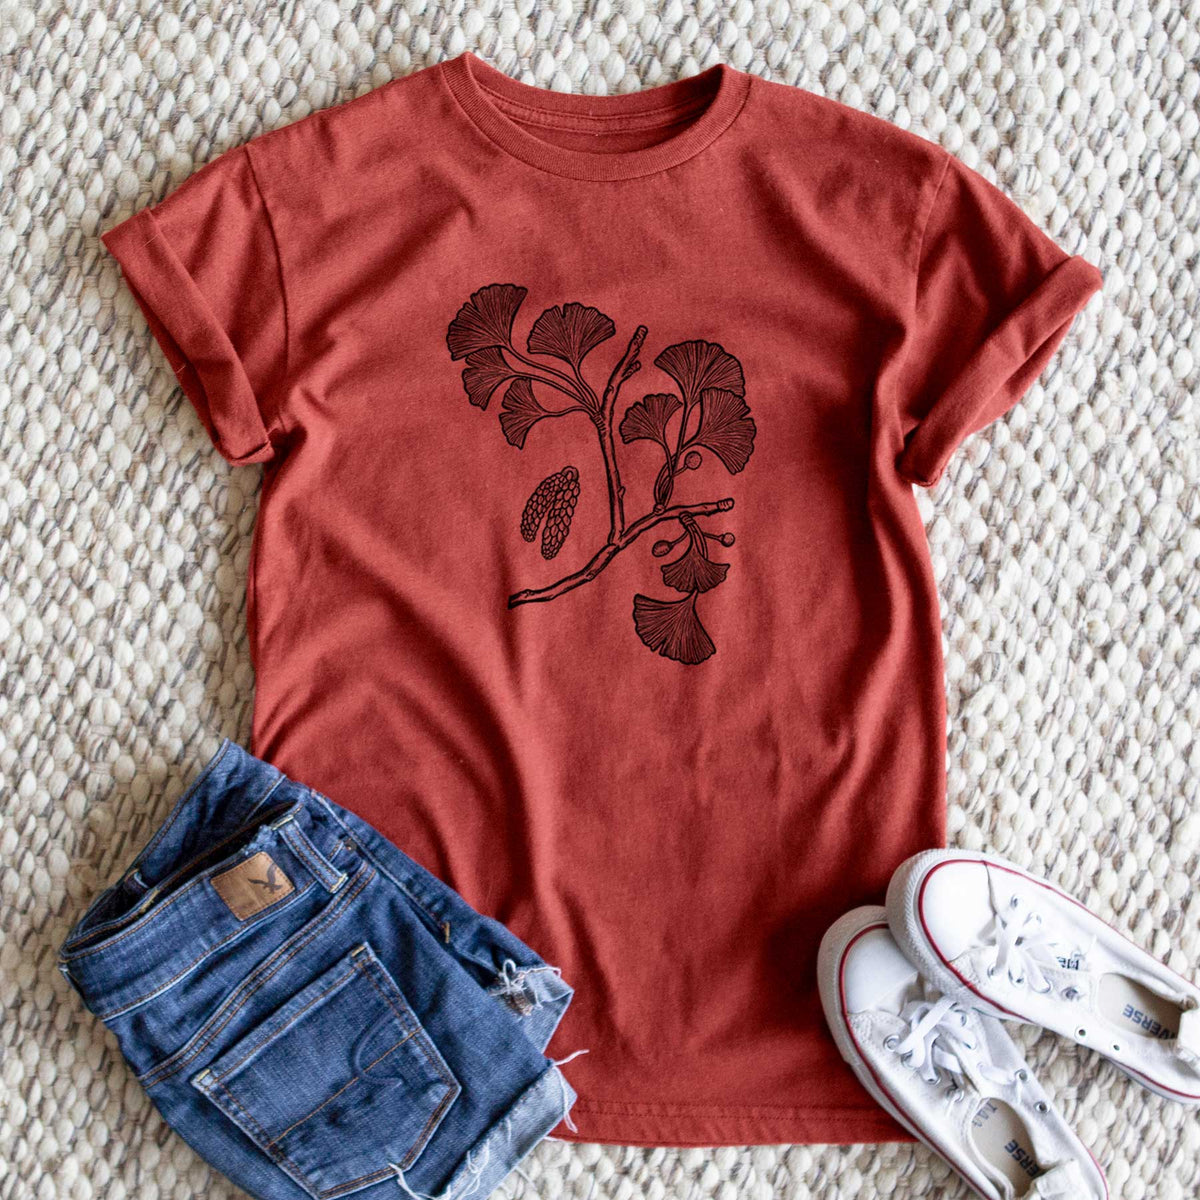 Ginkgo Biloba - Ginkgo Tree Stem with Leaves - Unisex Recycled Eco Tee  - CLOSEOUT - FINAL SALE